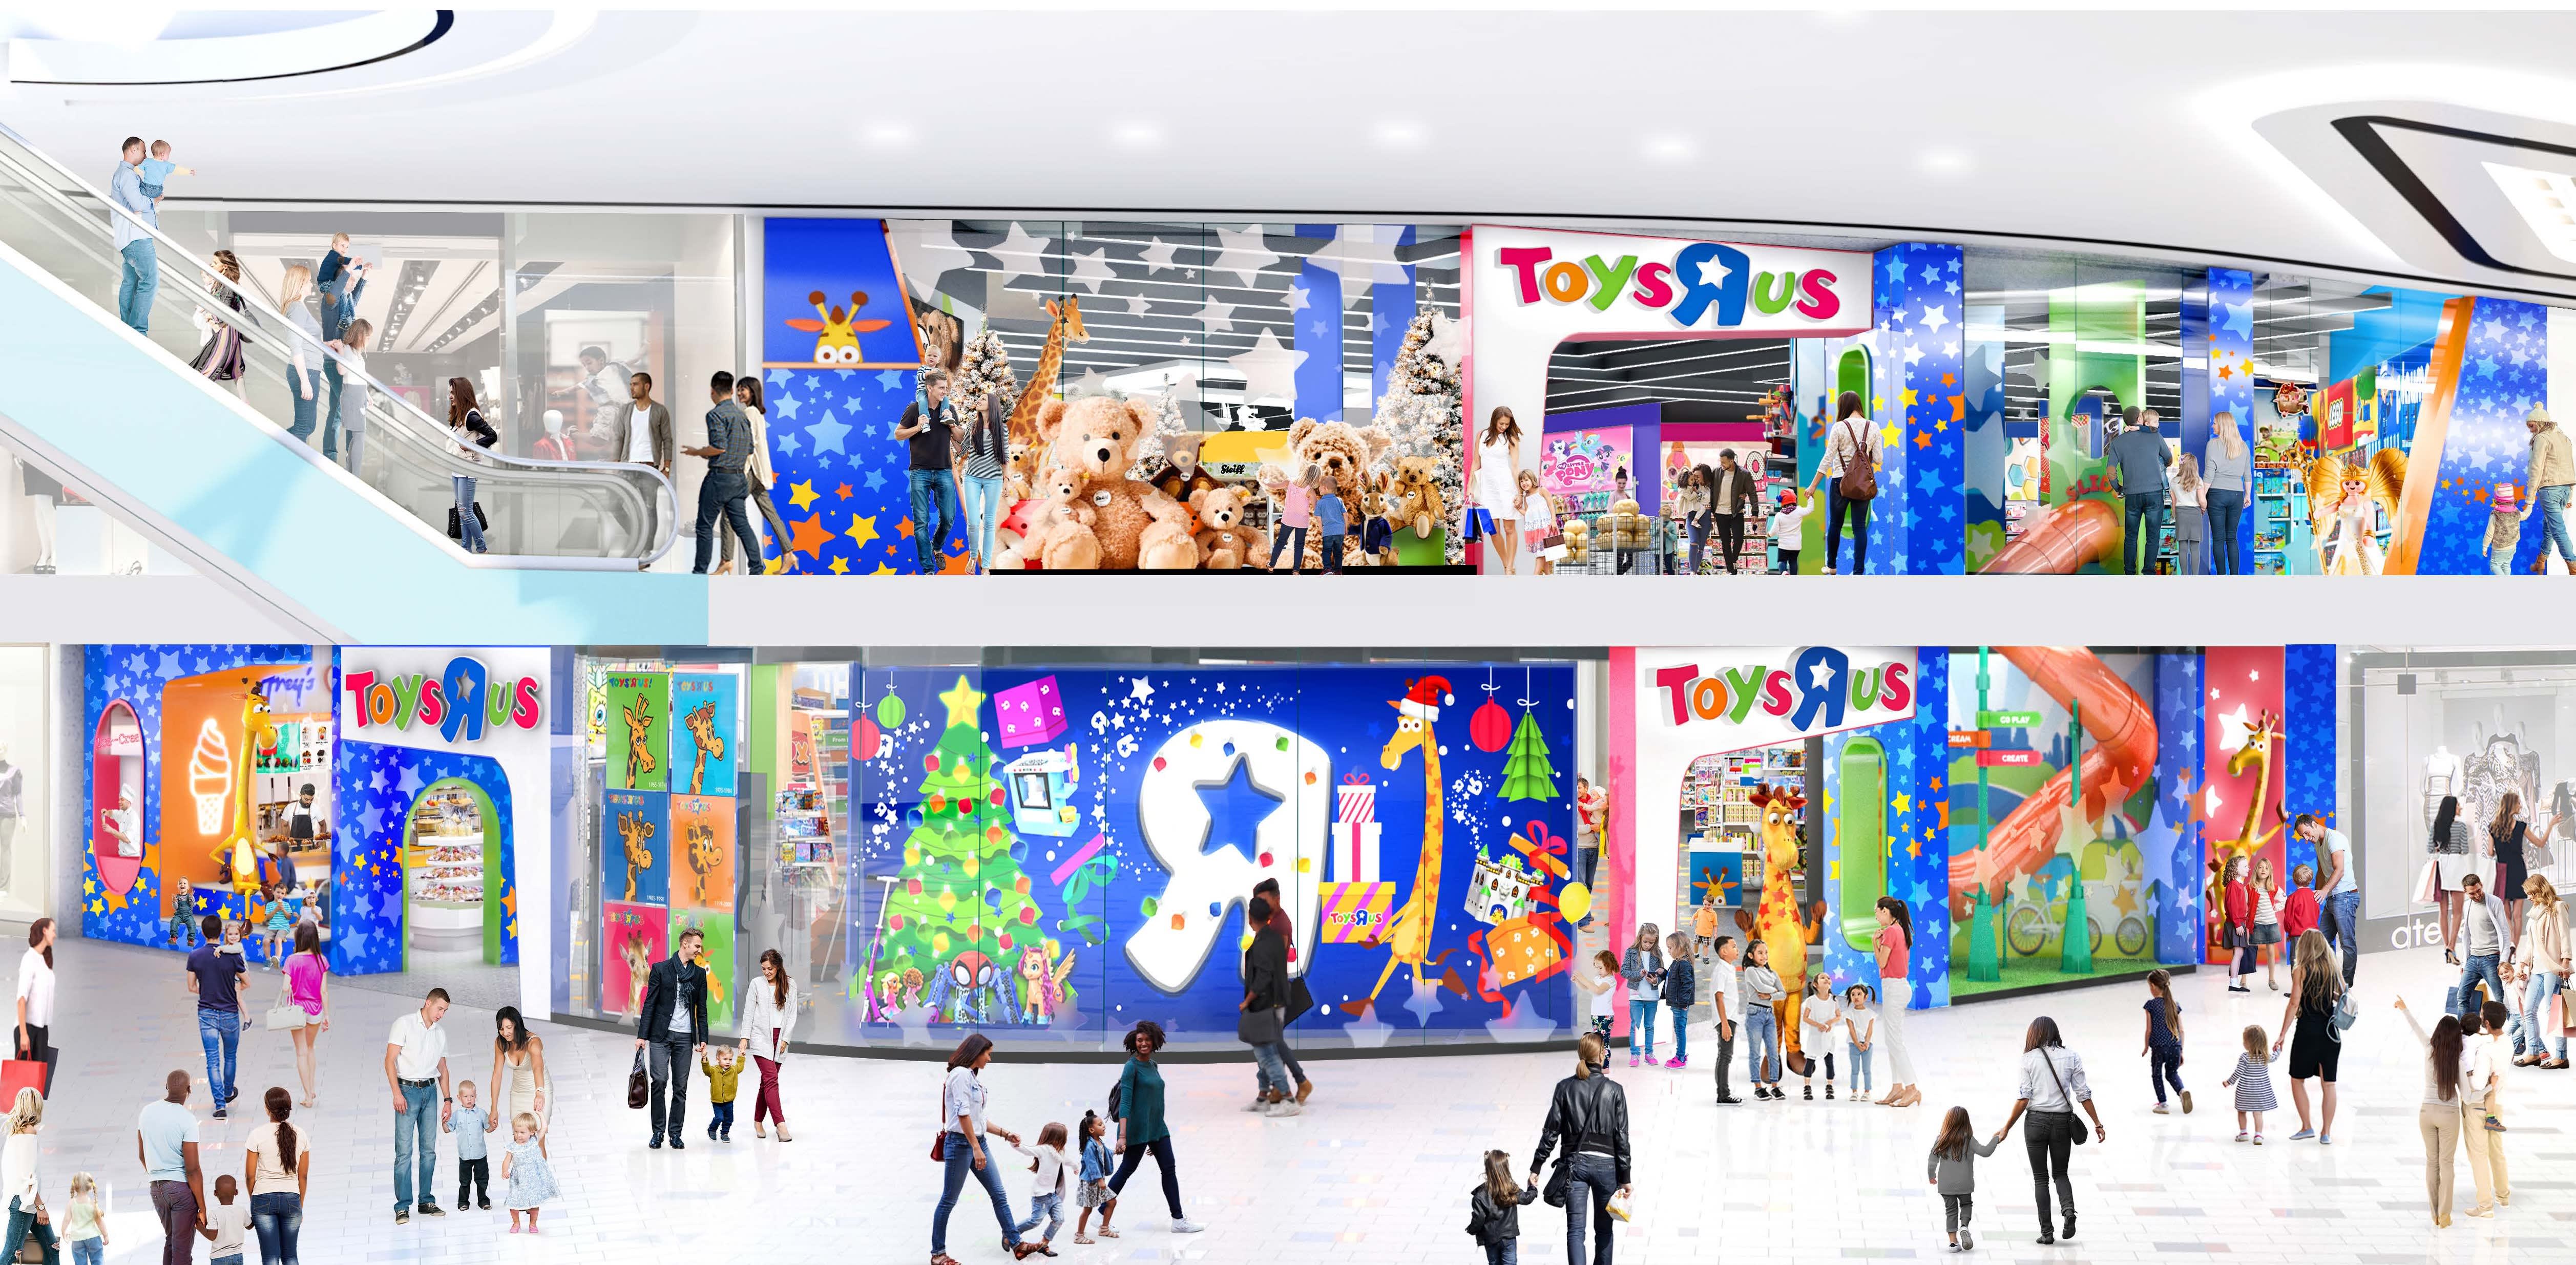 Toys R Us is opening a flagship store at American Dream later this month, marking its return to malls